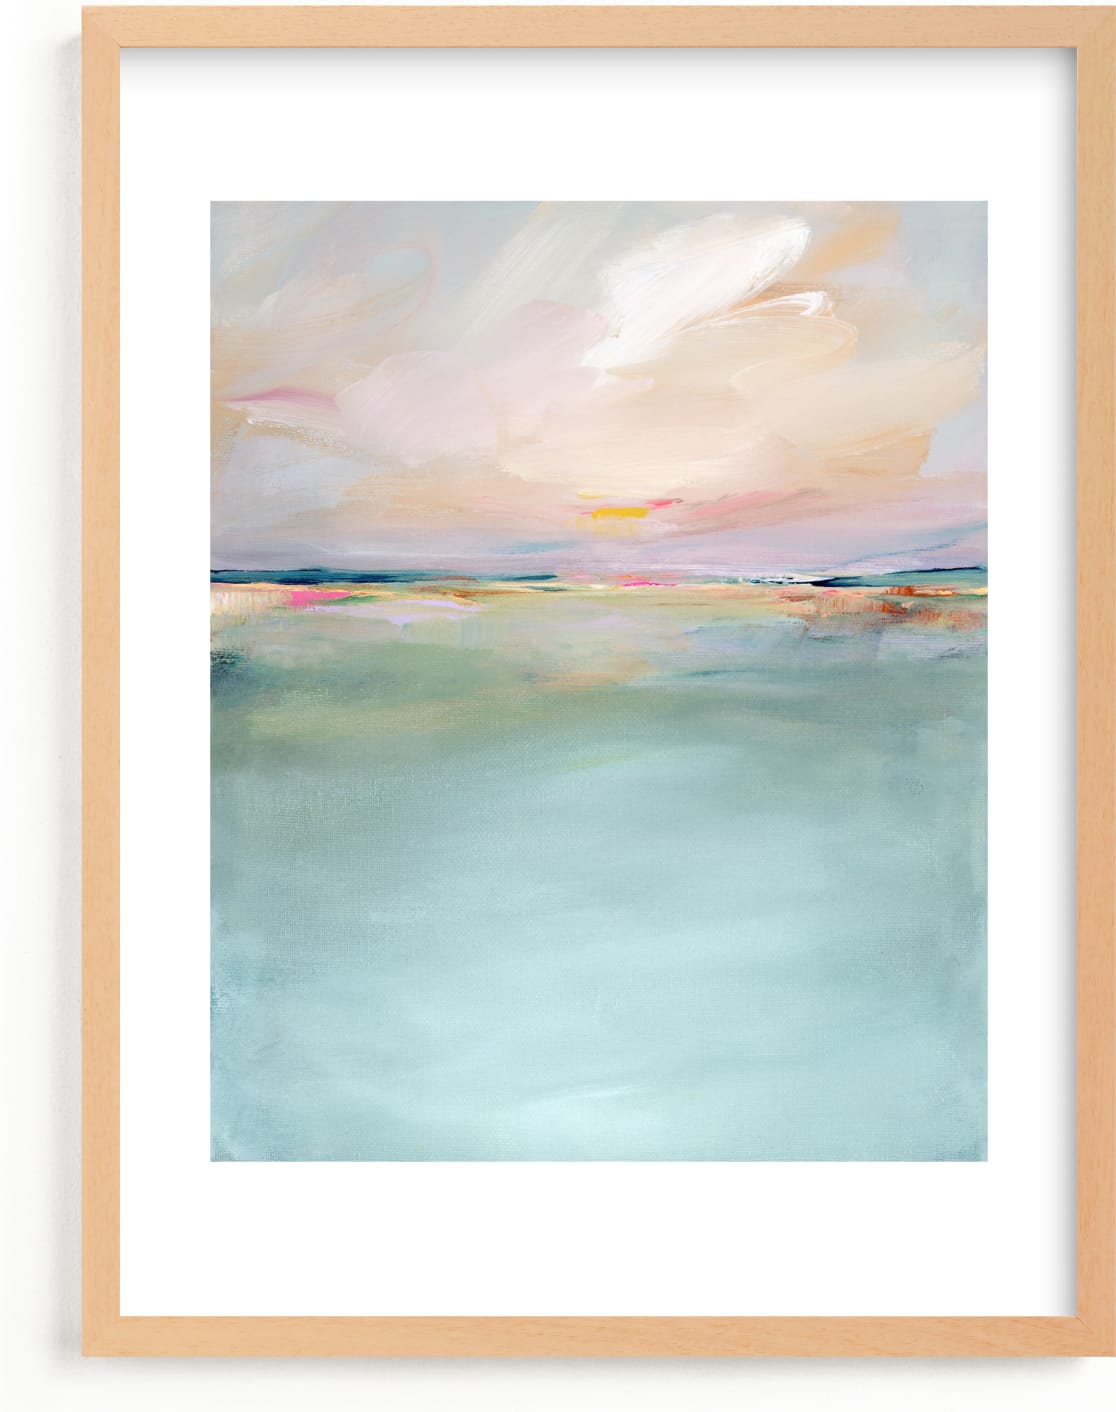 This is a blue, yellow, pink art by Lindsay Megahed called Summer Retreat.